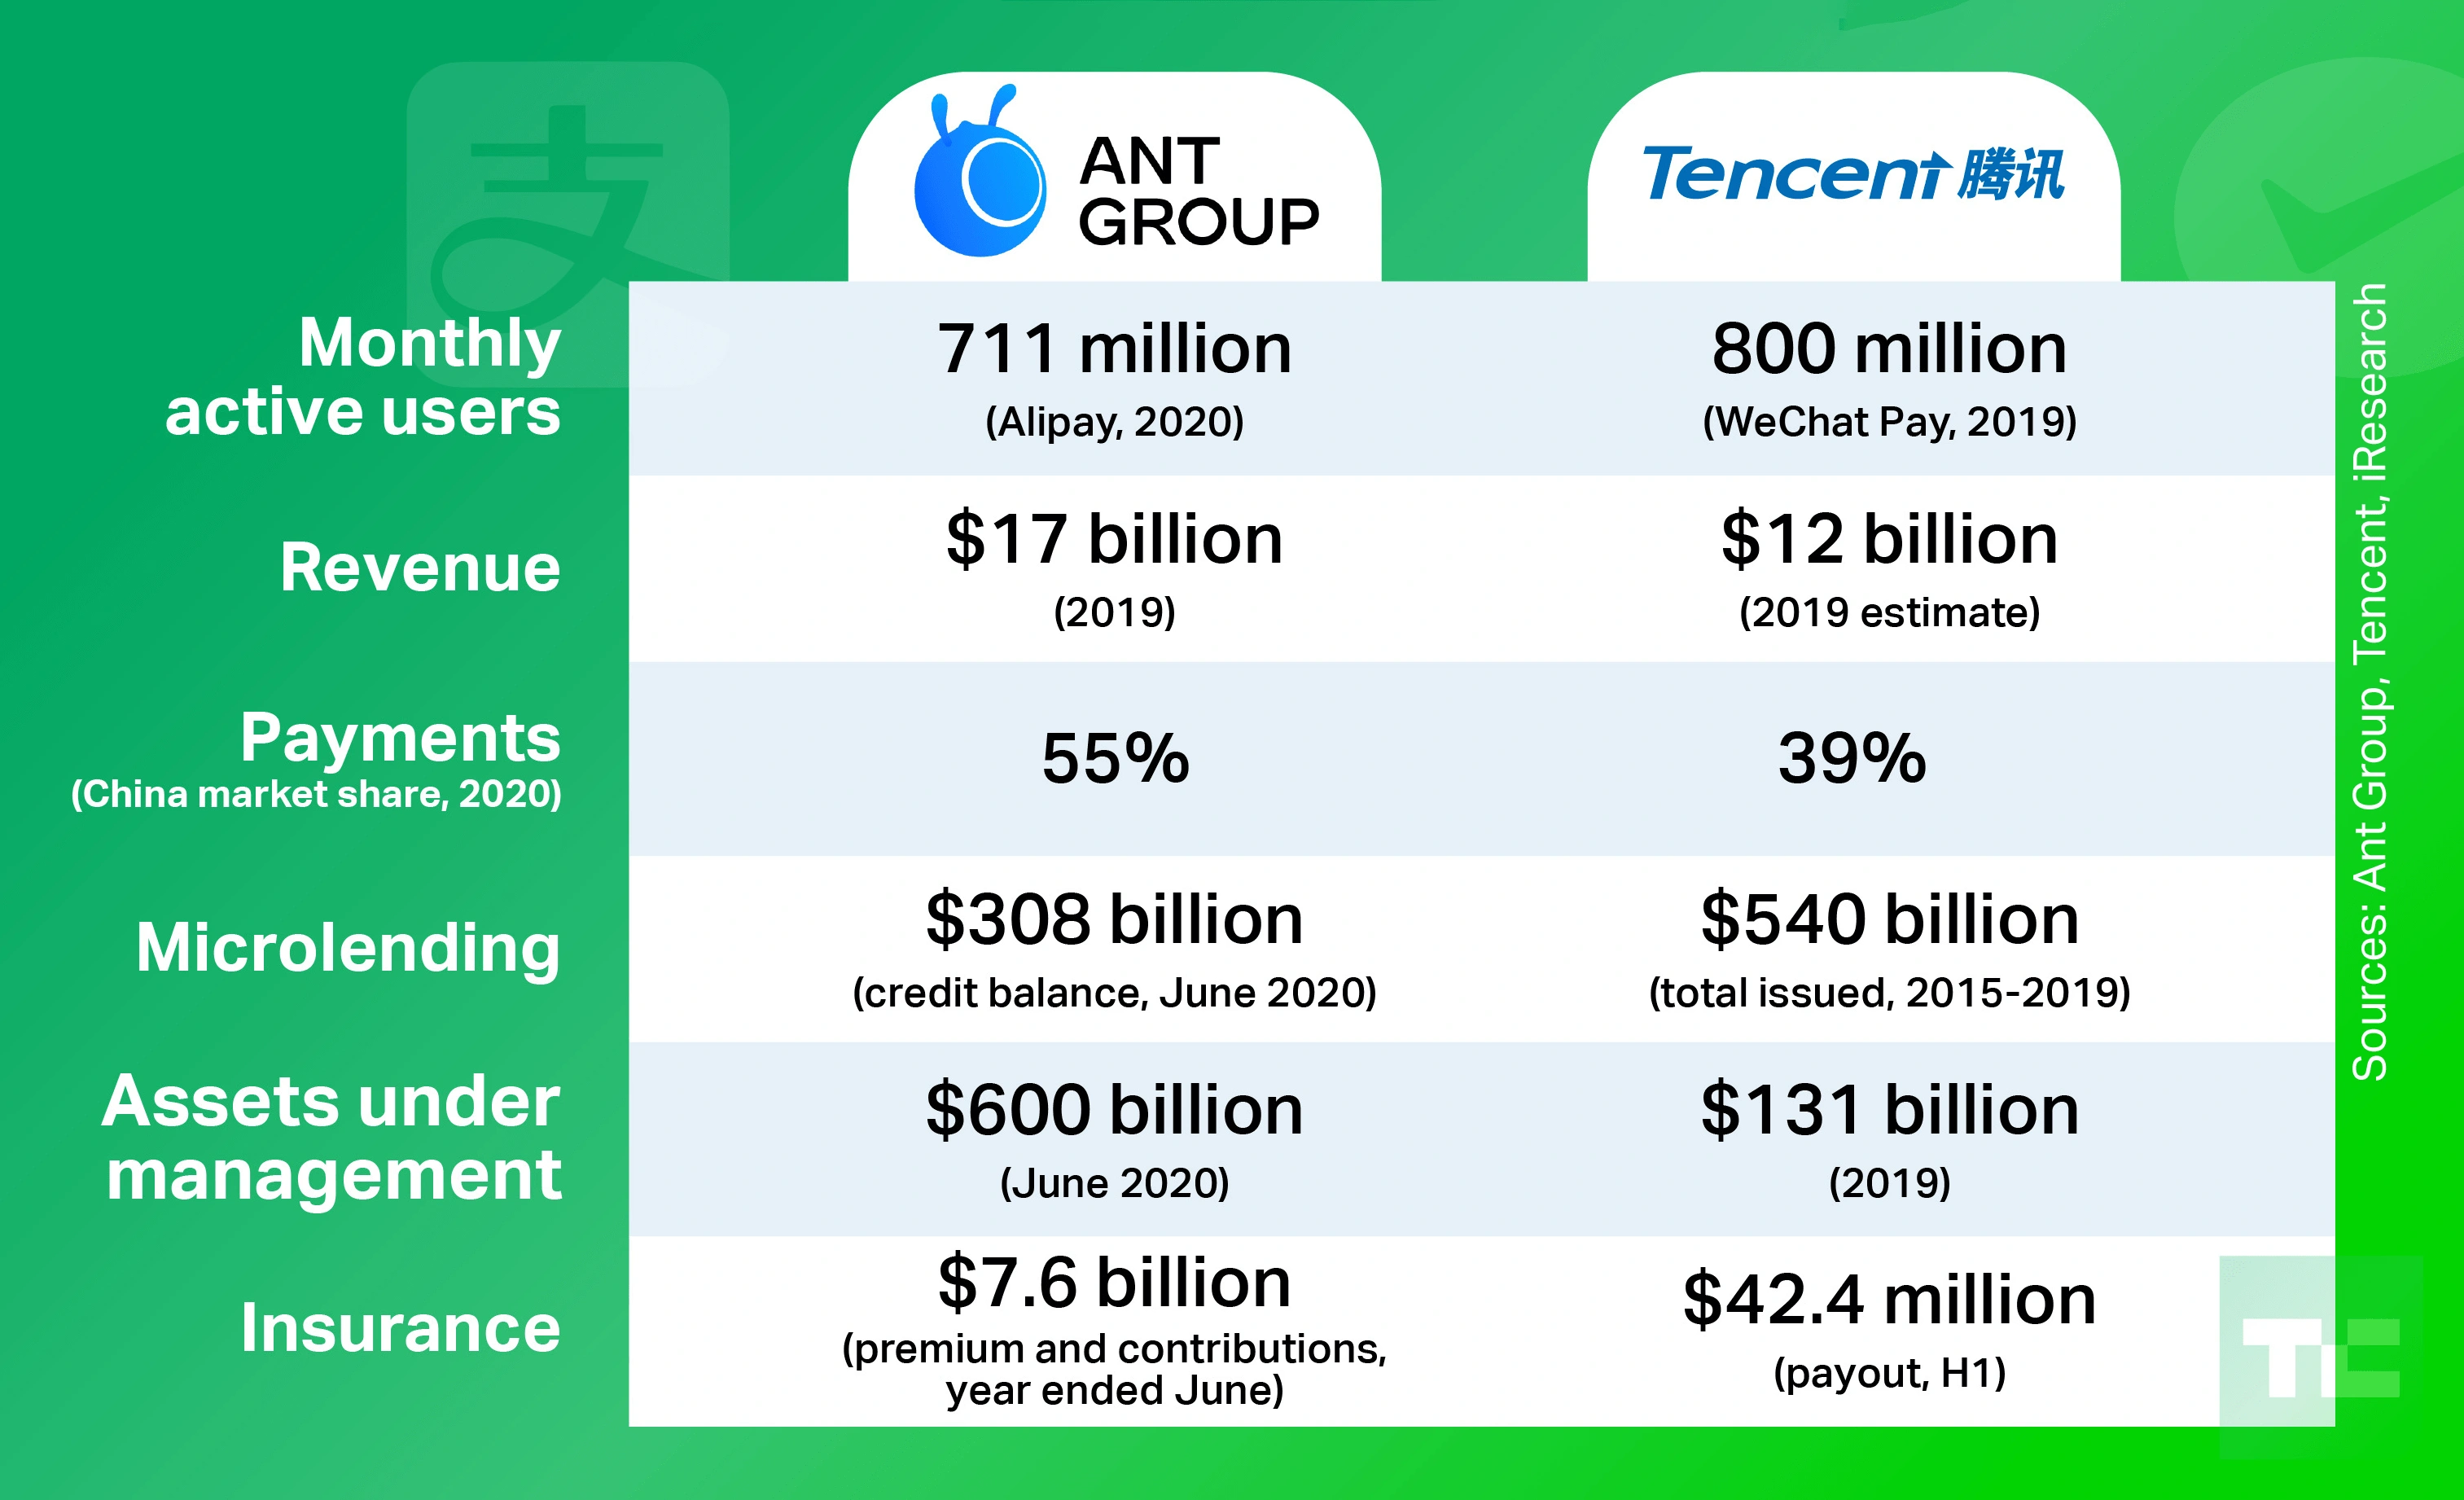 ant-group-vs-tencent-min.png